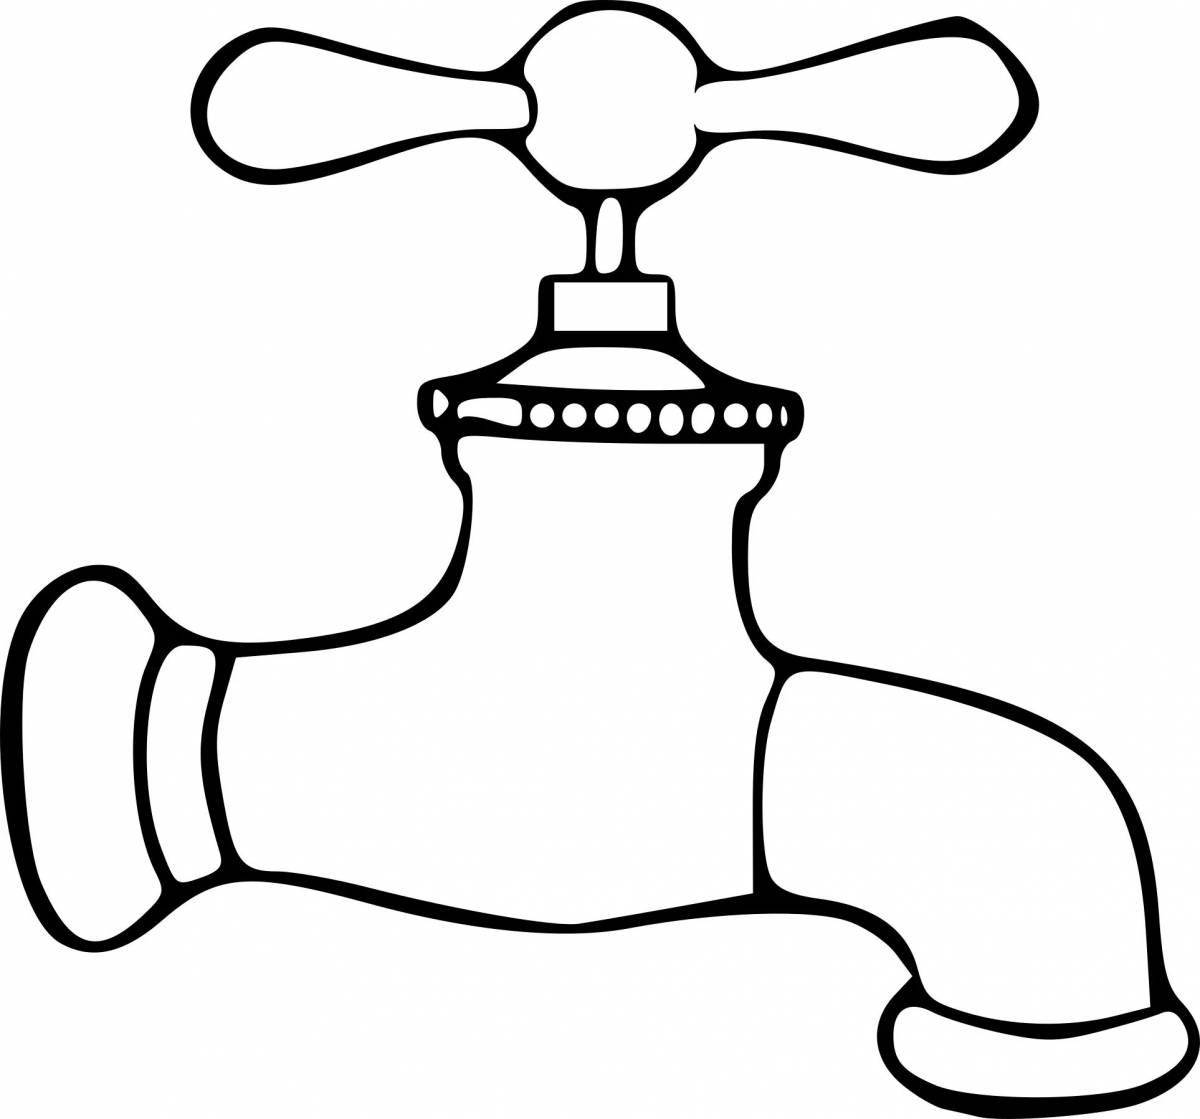 Coloring page elegant faucets